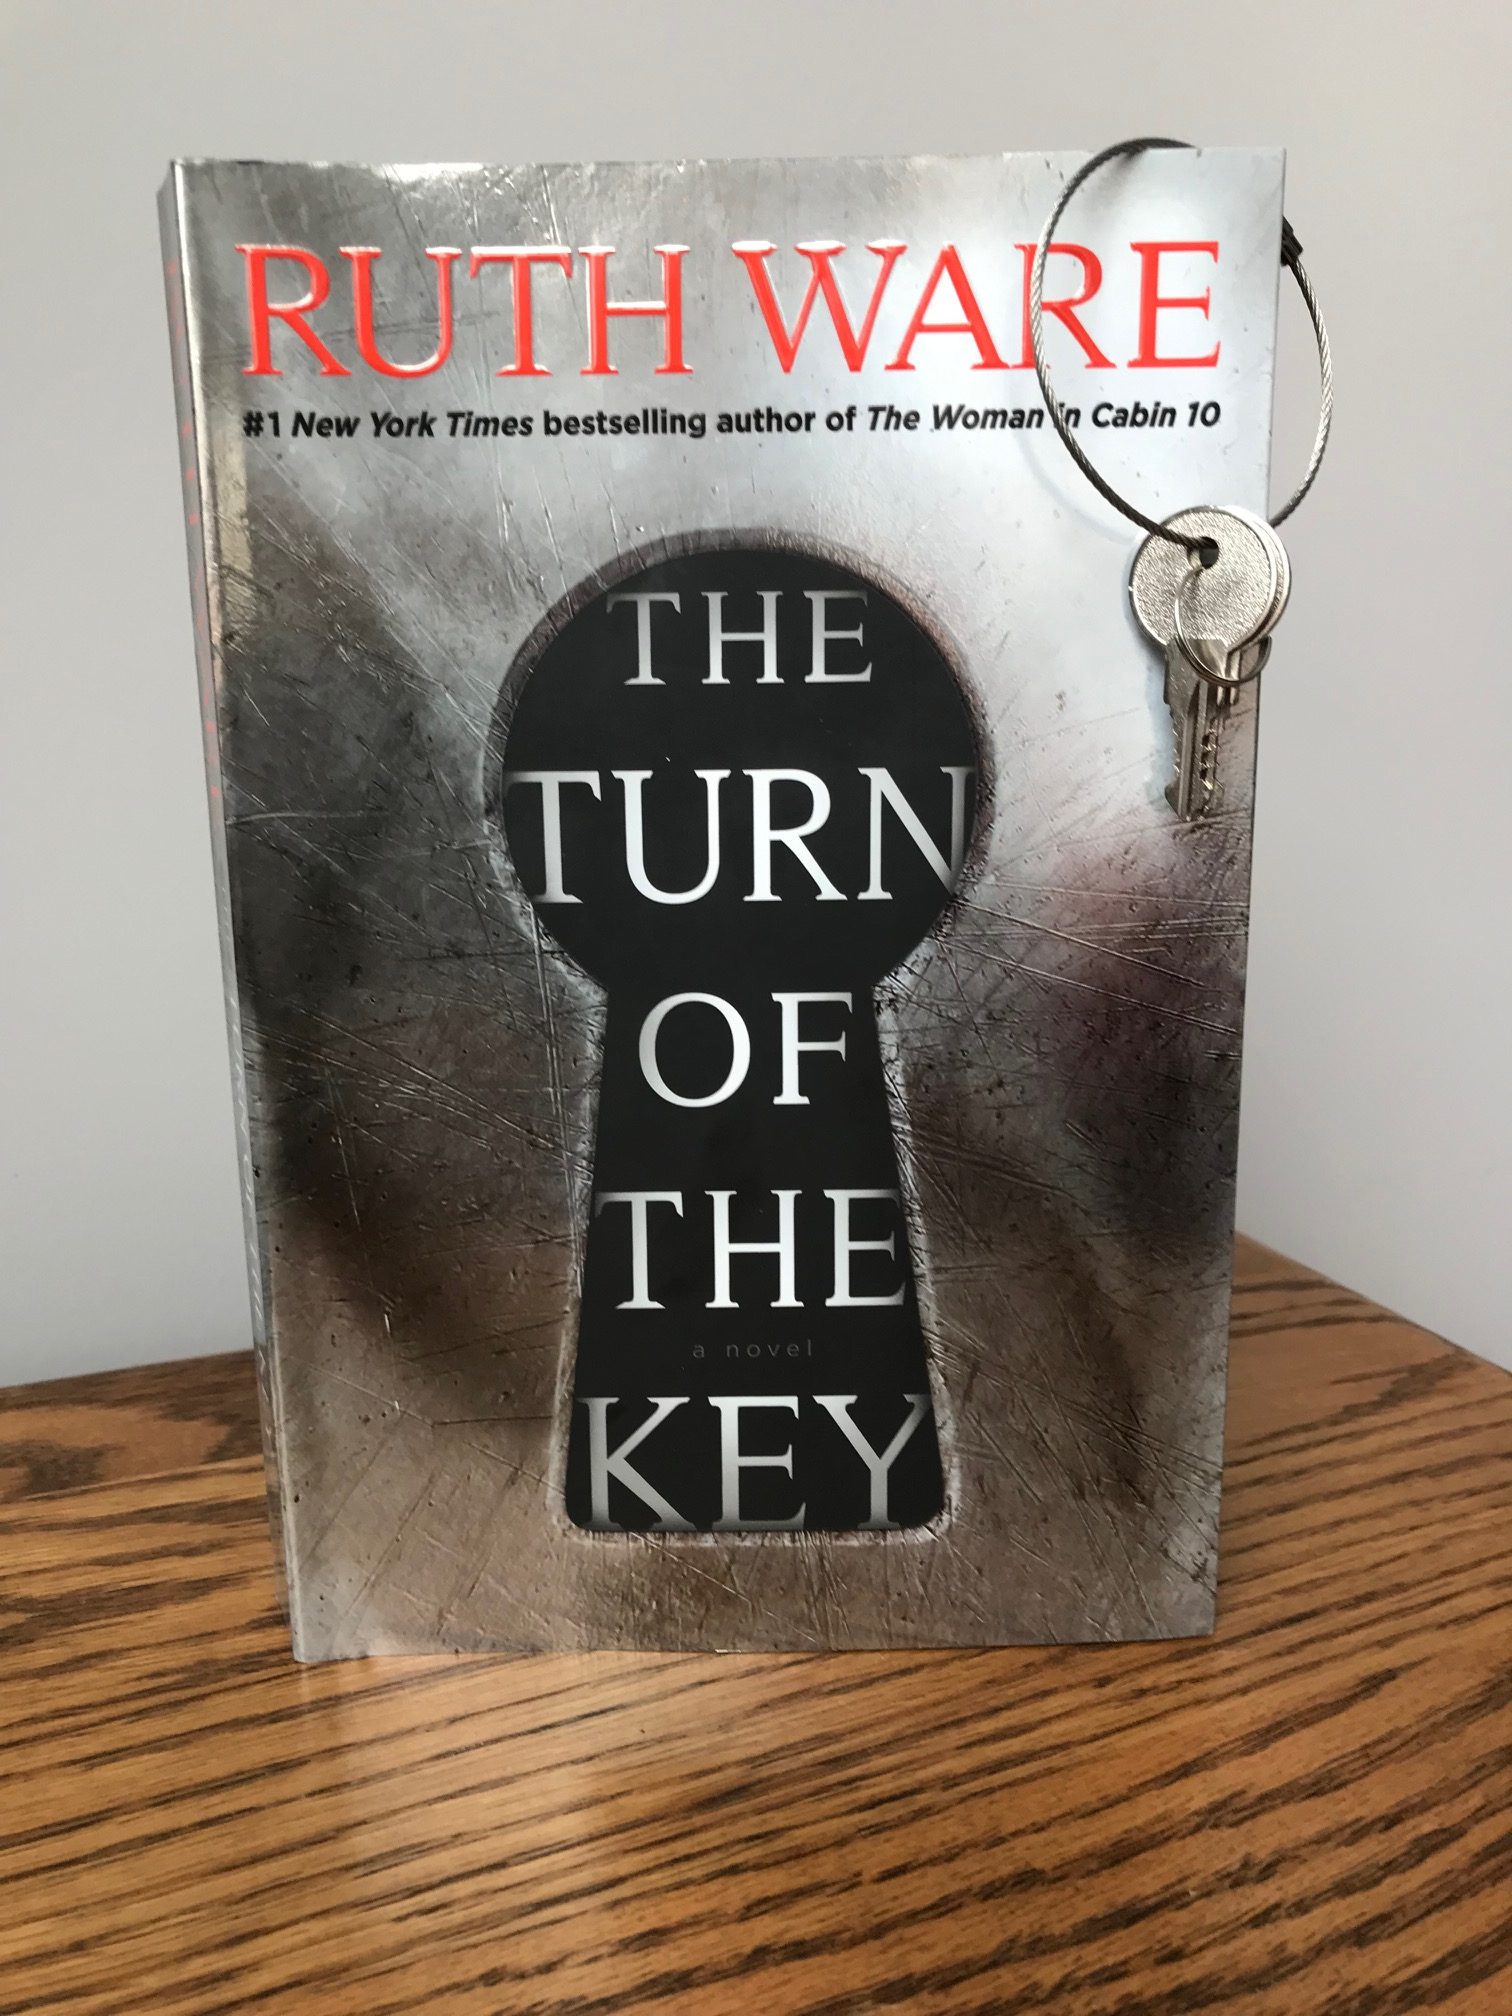 picture of The Turn of the Key book by Ruth Ware, with a circular metal clasp holding two keys hanging off the top of the book